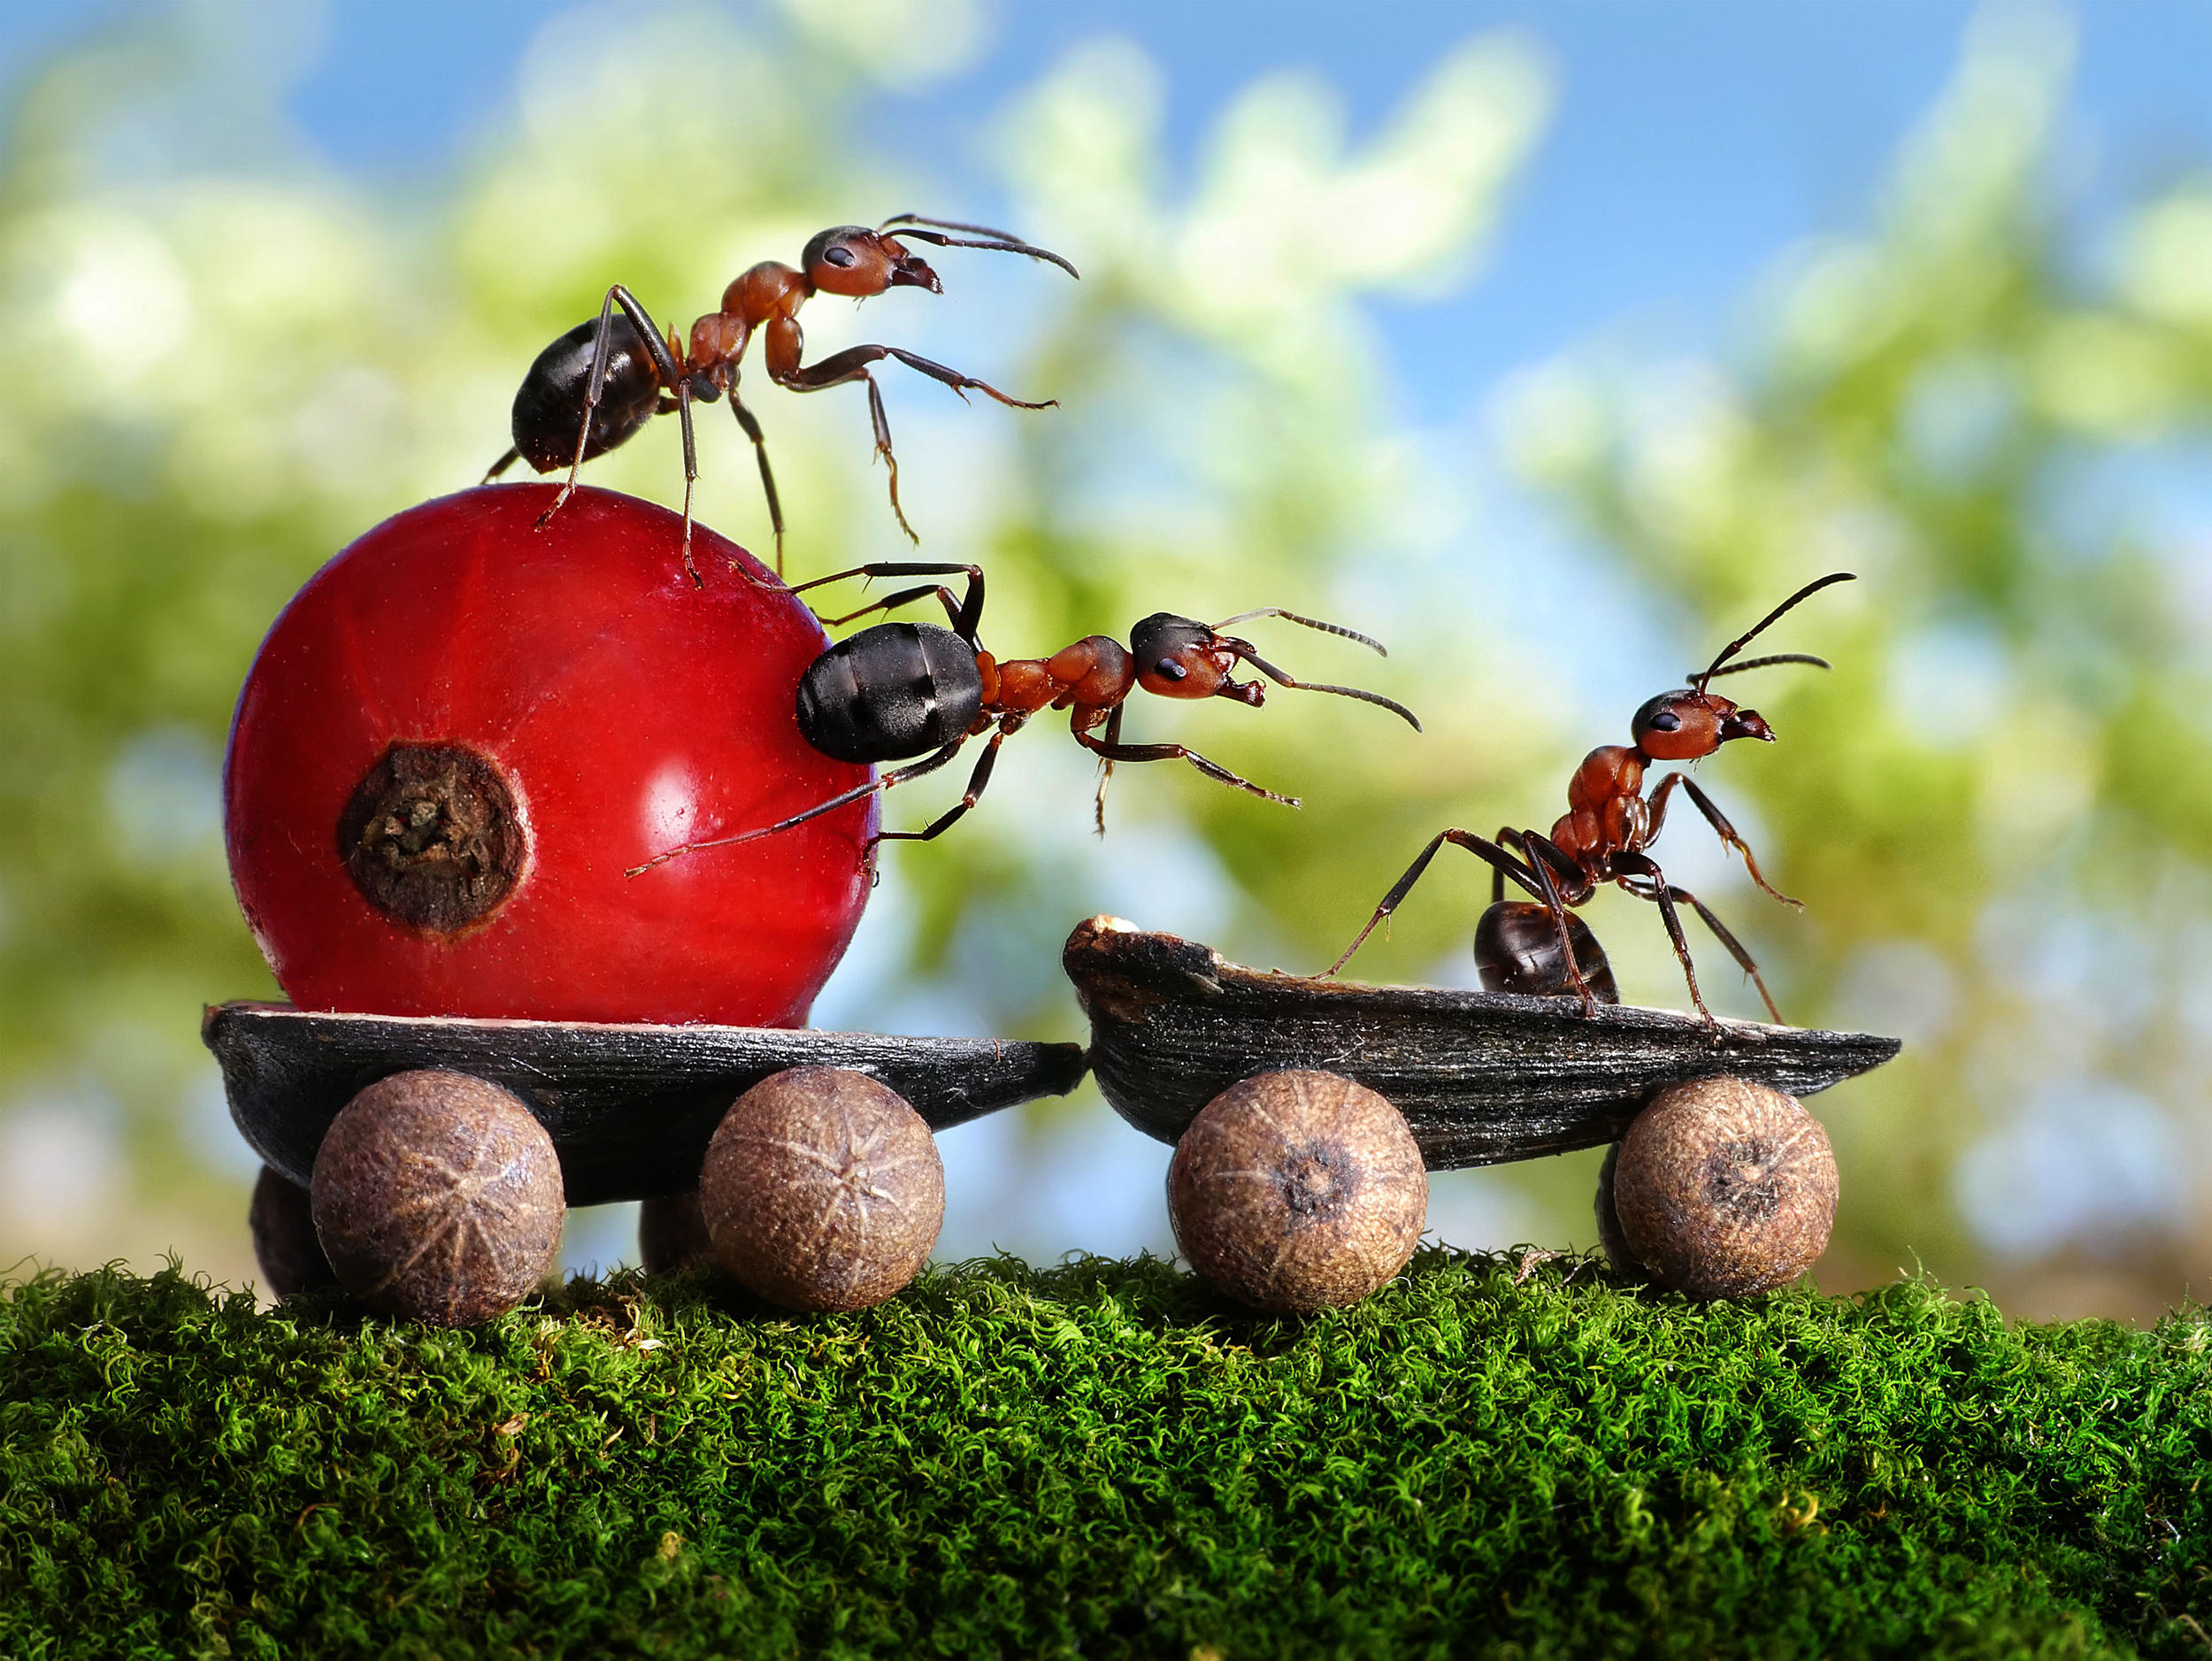 nature, Insect, Macro, Depth of field, Photoshop, Seeds, Fruit, Ants, Red currant, Moss Wallpaper